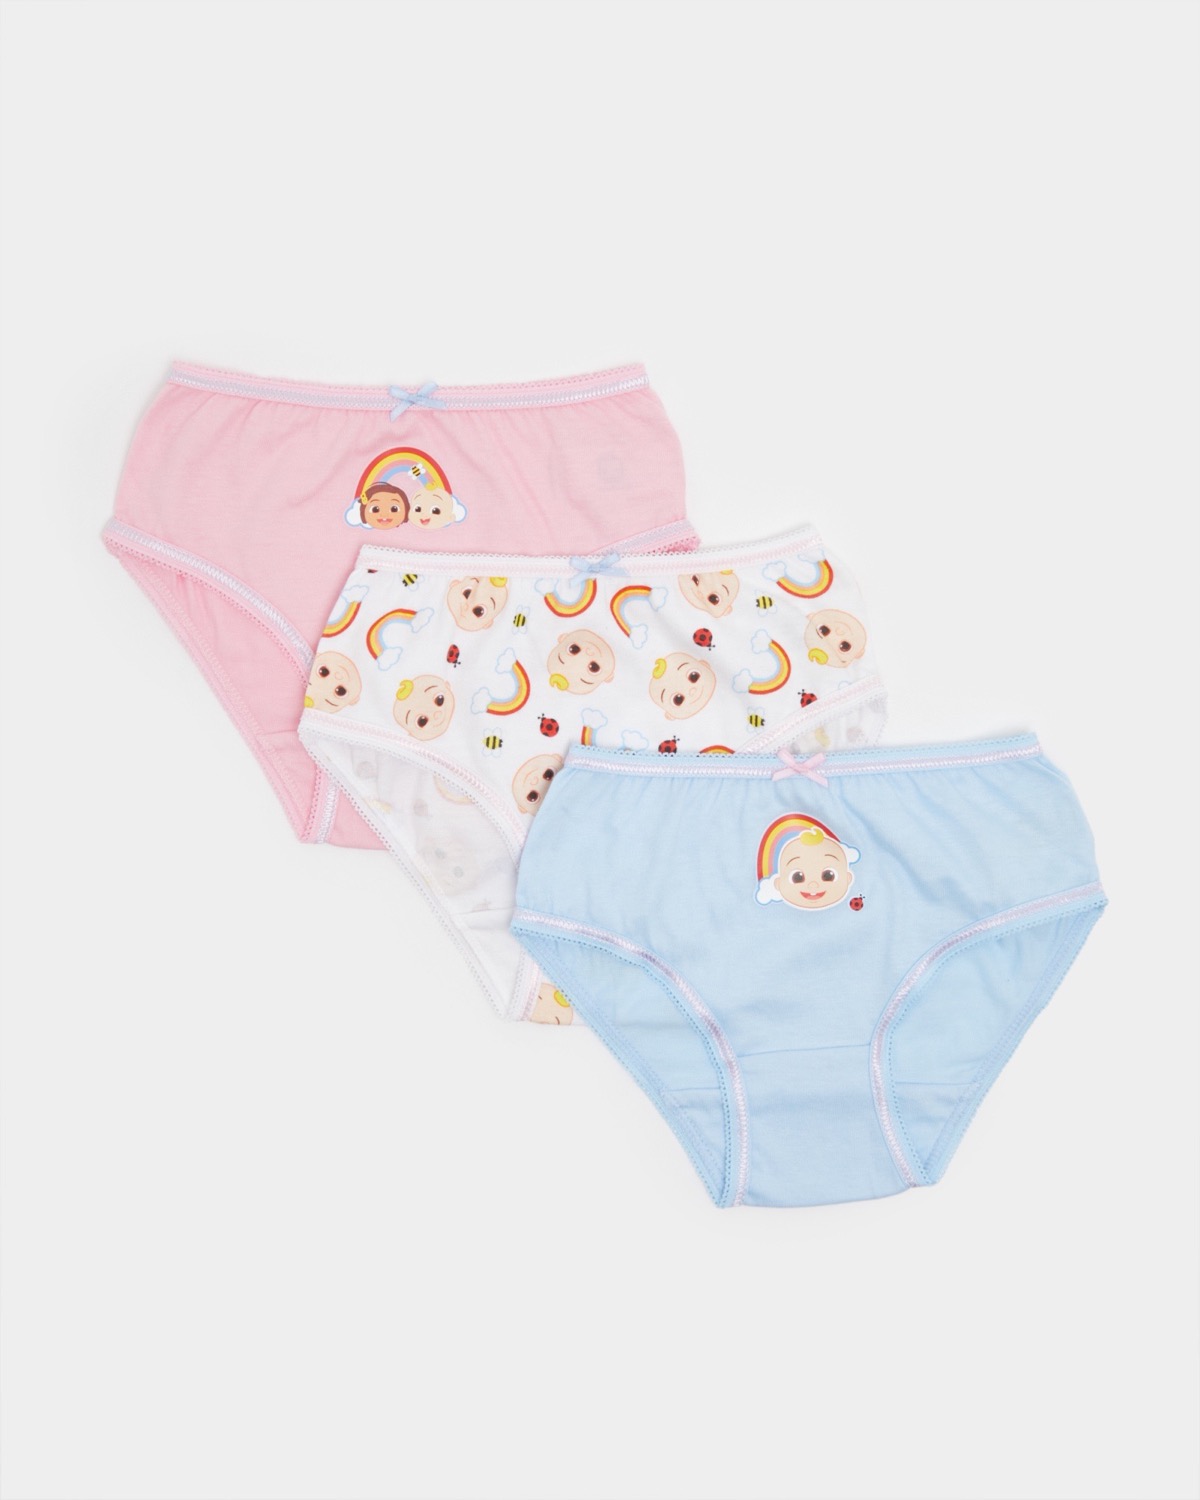 Cocomelon Pack of 5 Briefs, Kids